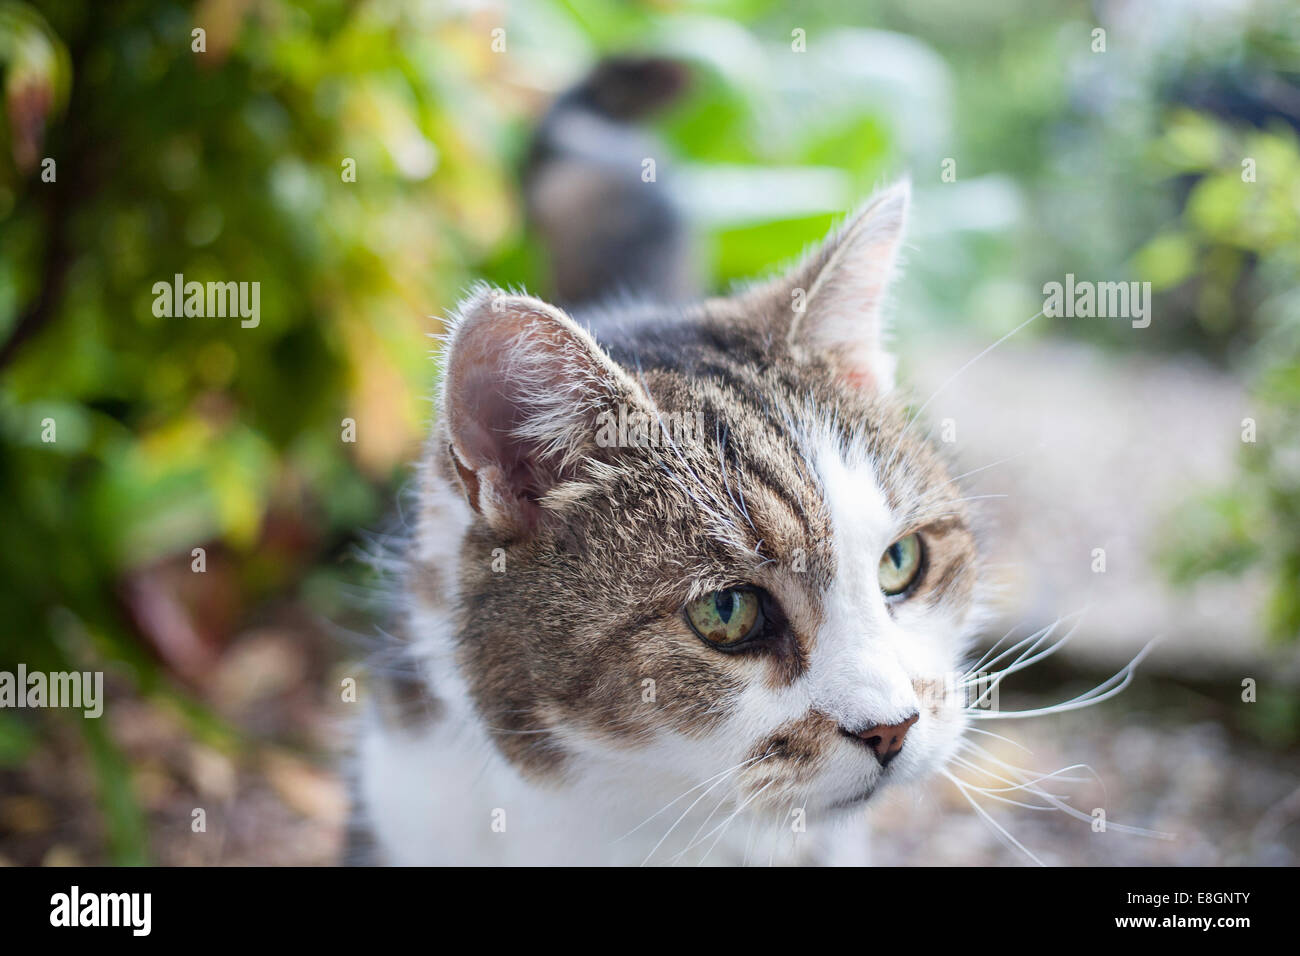 Domestic short haired cat with brown and white fur and green eyes outside in garden Stock Photo